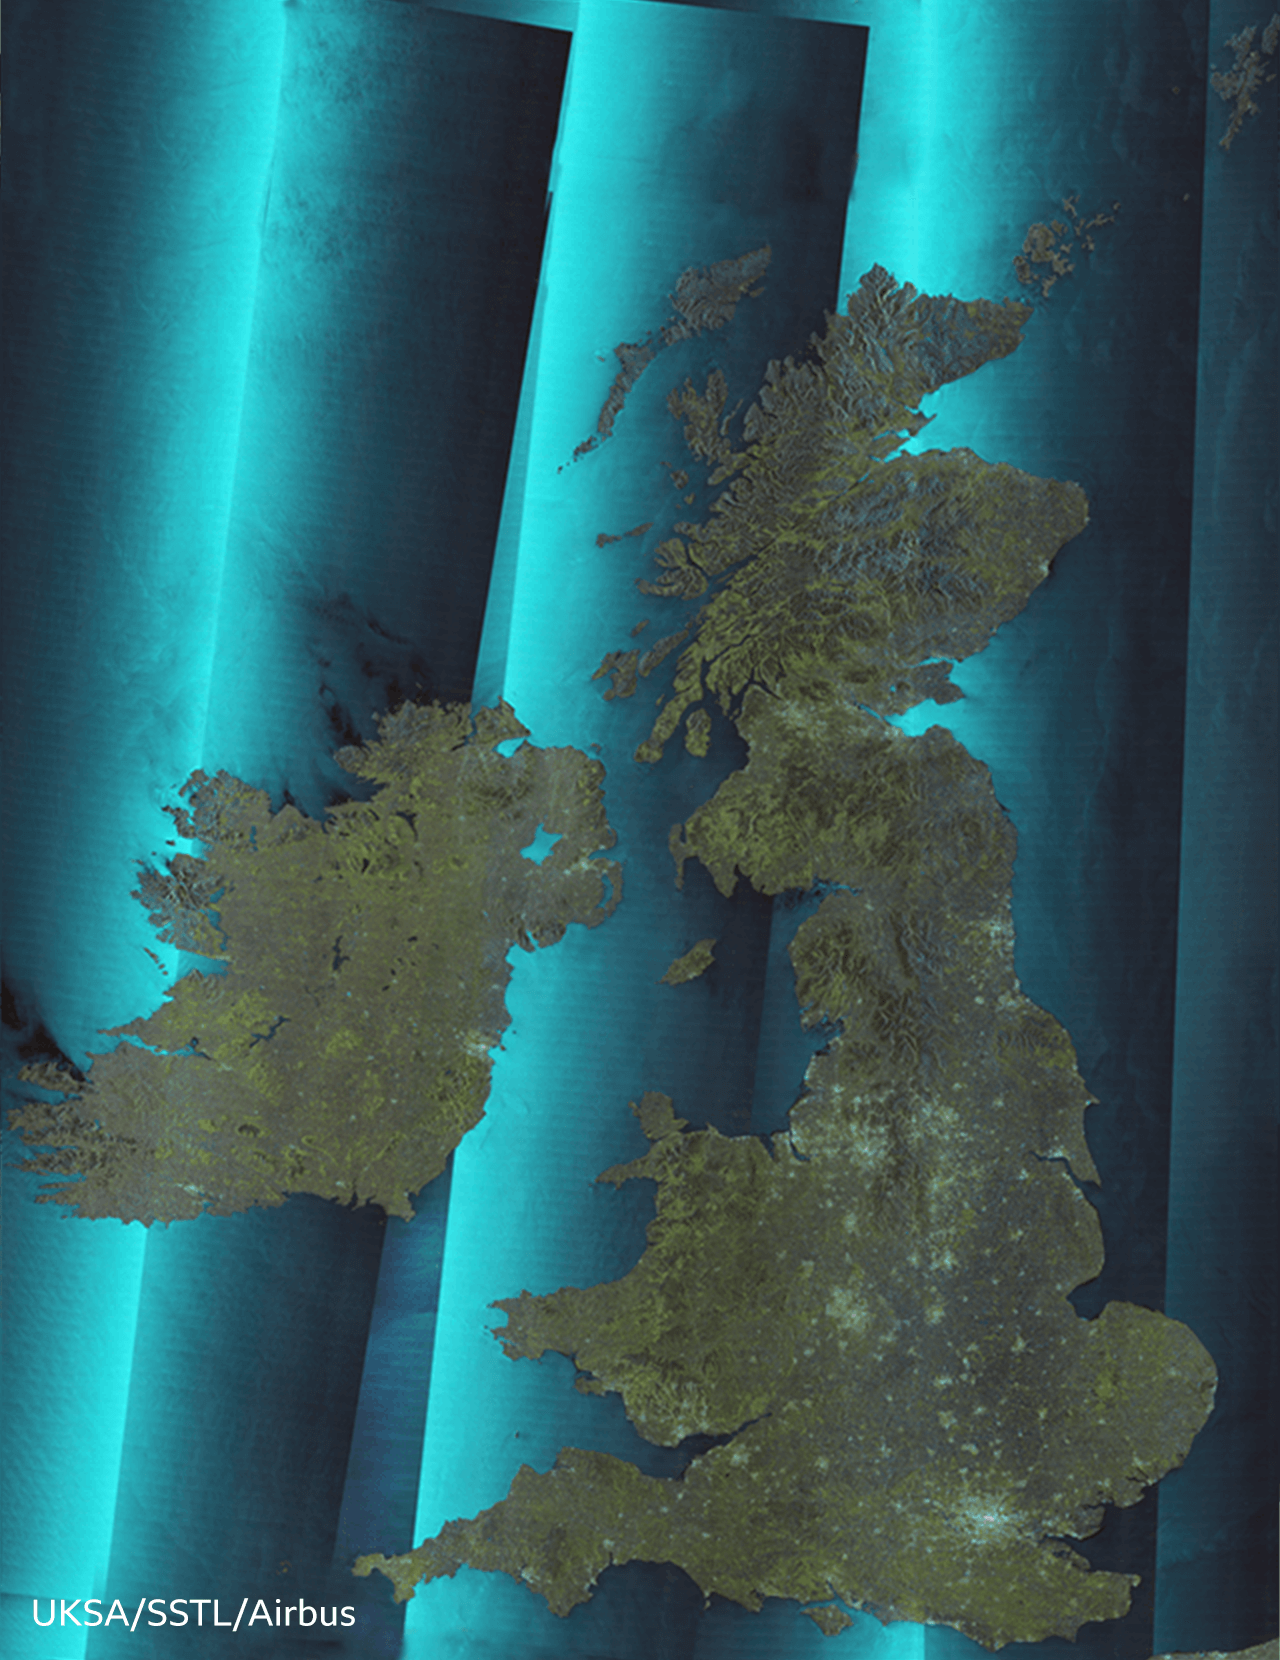 Radar satellite's stunning map of UK and Ireland - Oxford Space Systems